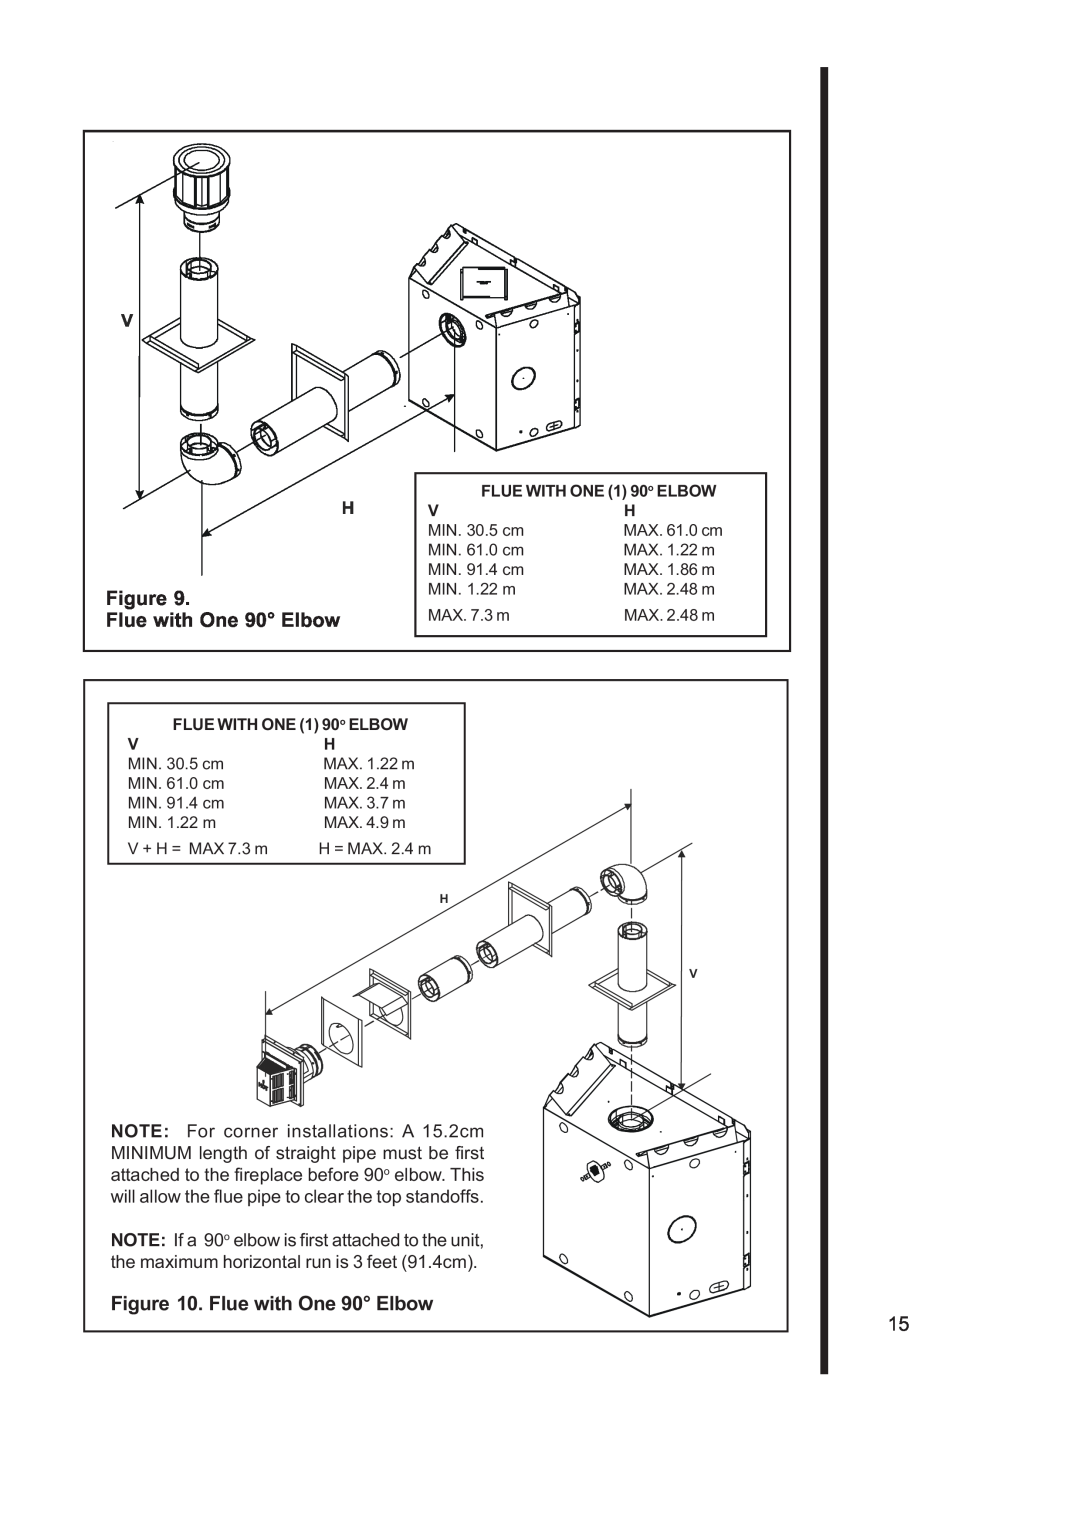 Heat & Glo LifeStyle 6000TRS-CD manual Flue with One 90 Elbow 